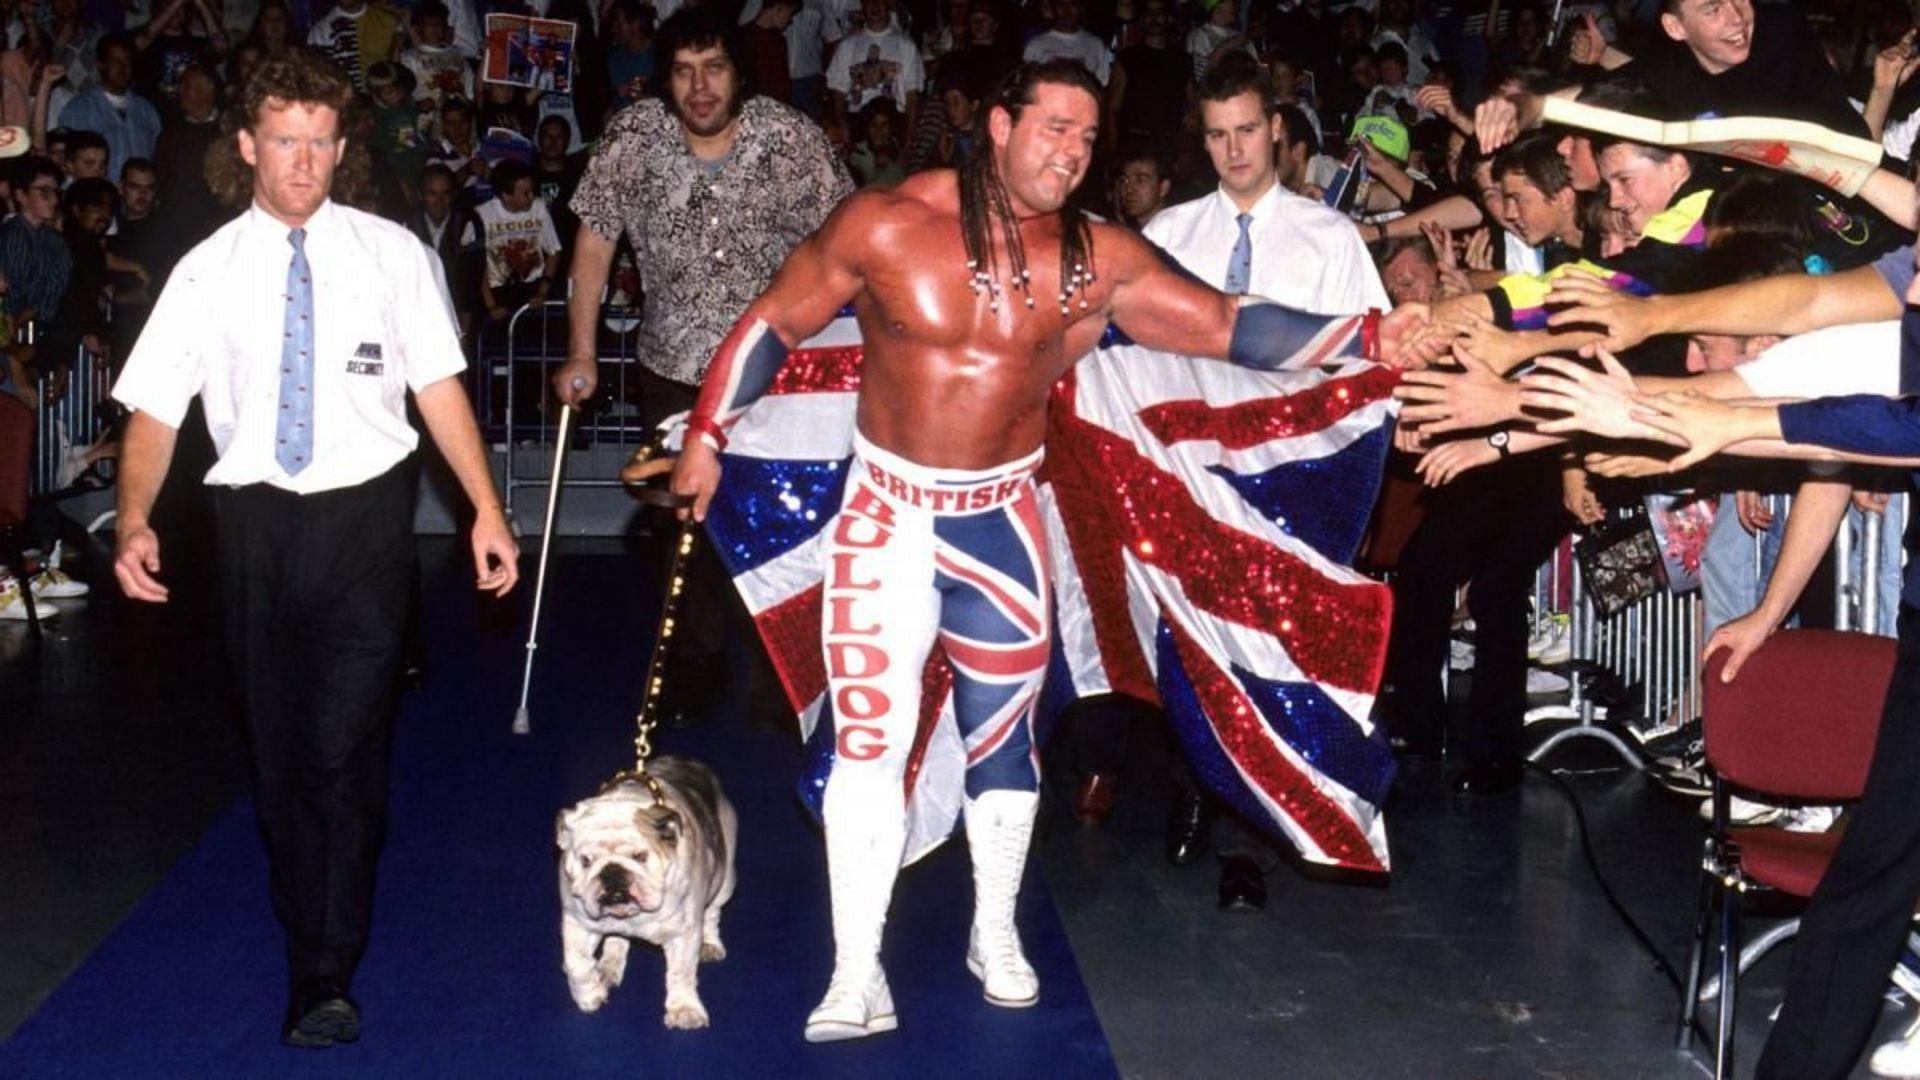 The British Bulldog had an on-and-off relationship with Sunny